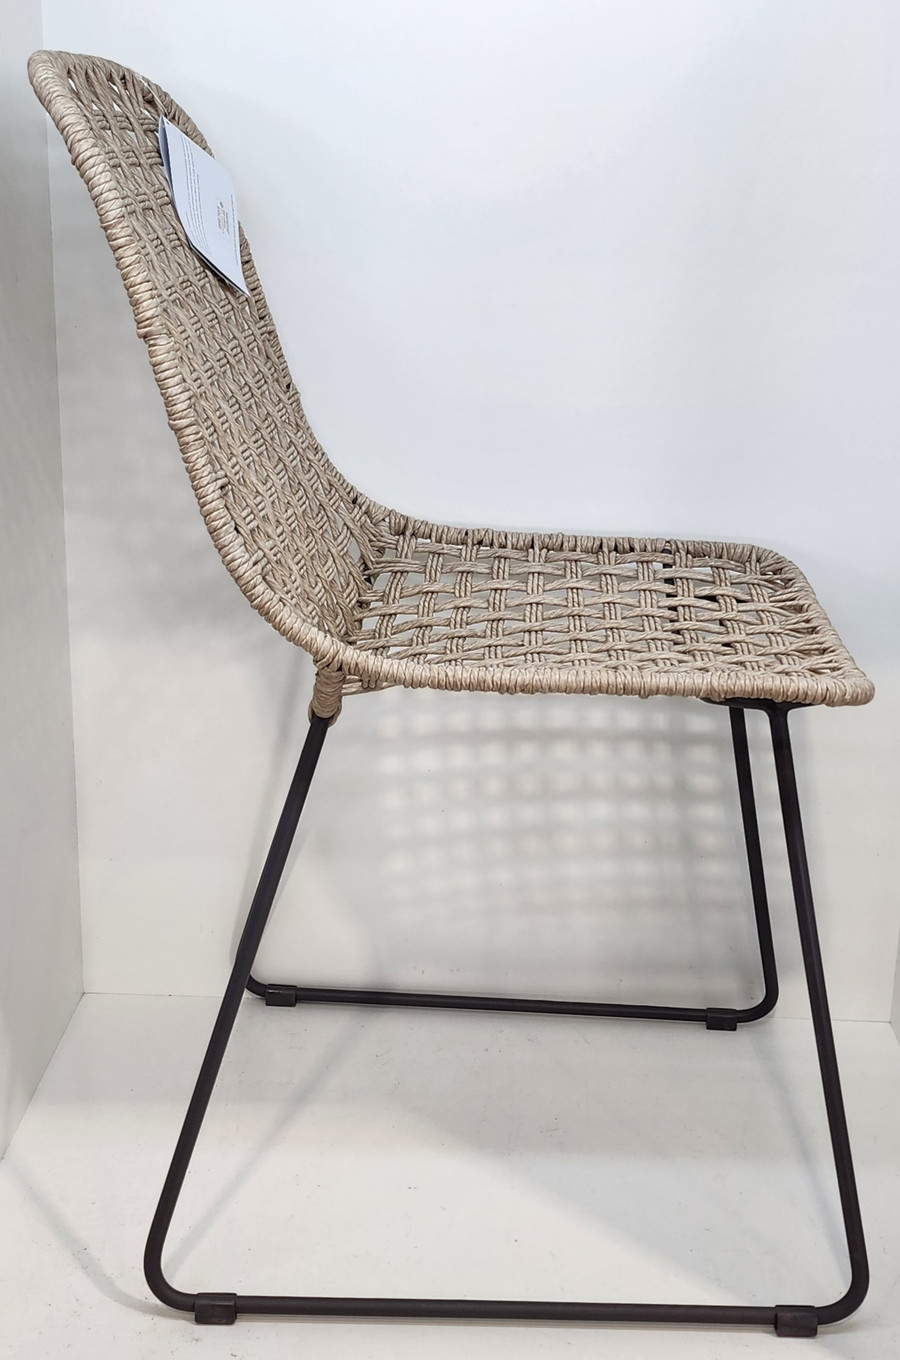 KAIA Dining side chair - white shell ecolene wicker on a coal hot dipped galvanised steel frame with sleigh legs - side view 
Also available in the matching KAIA dining armchair